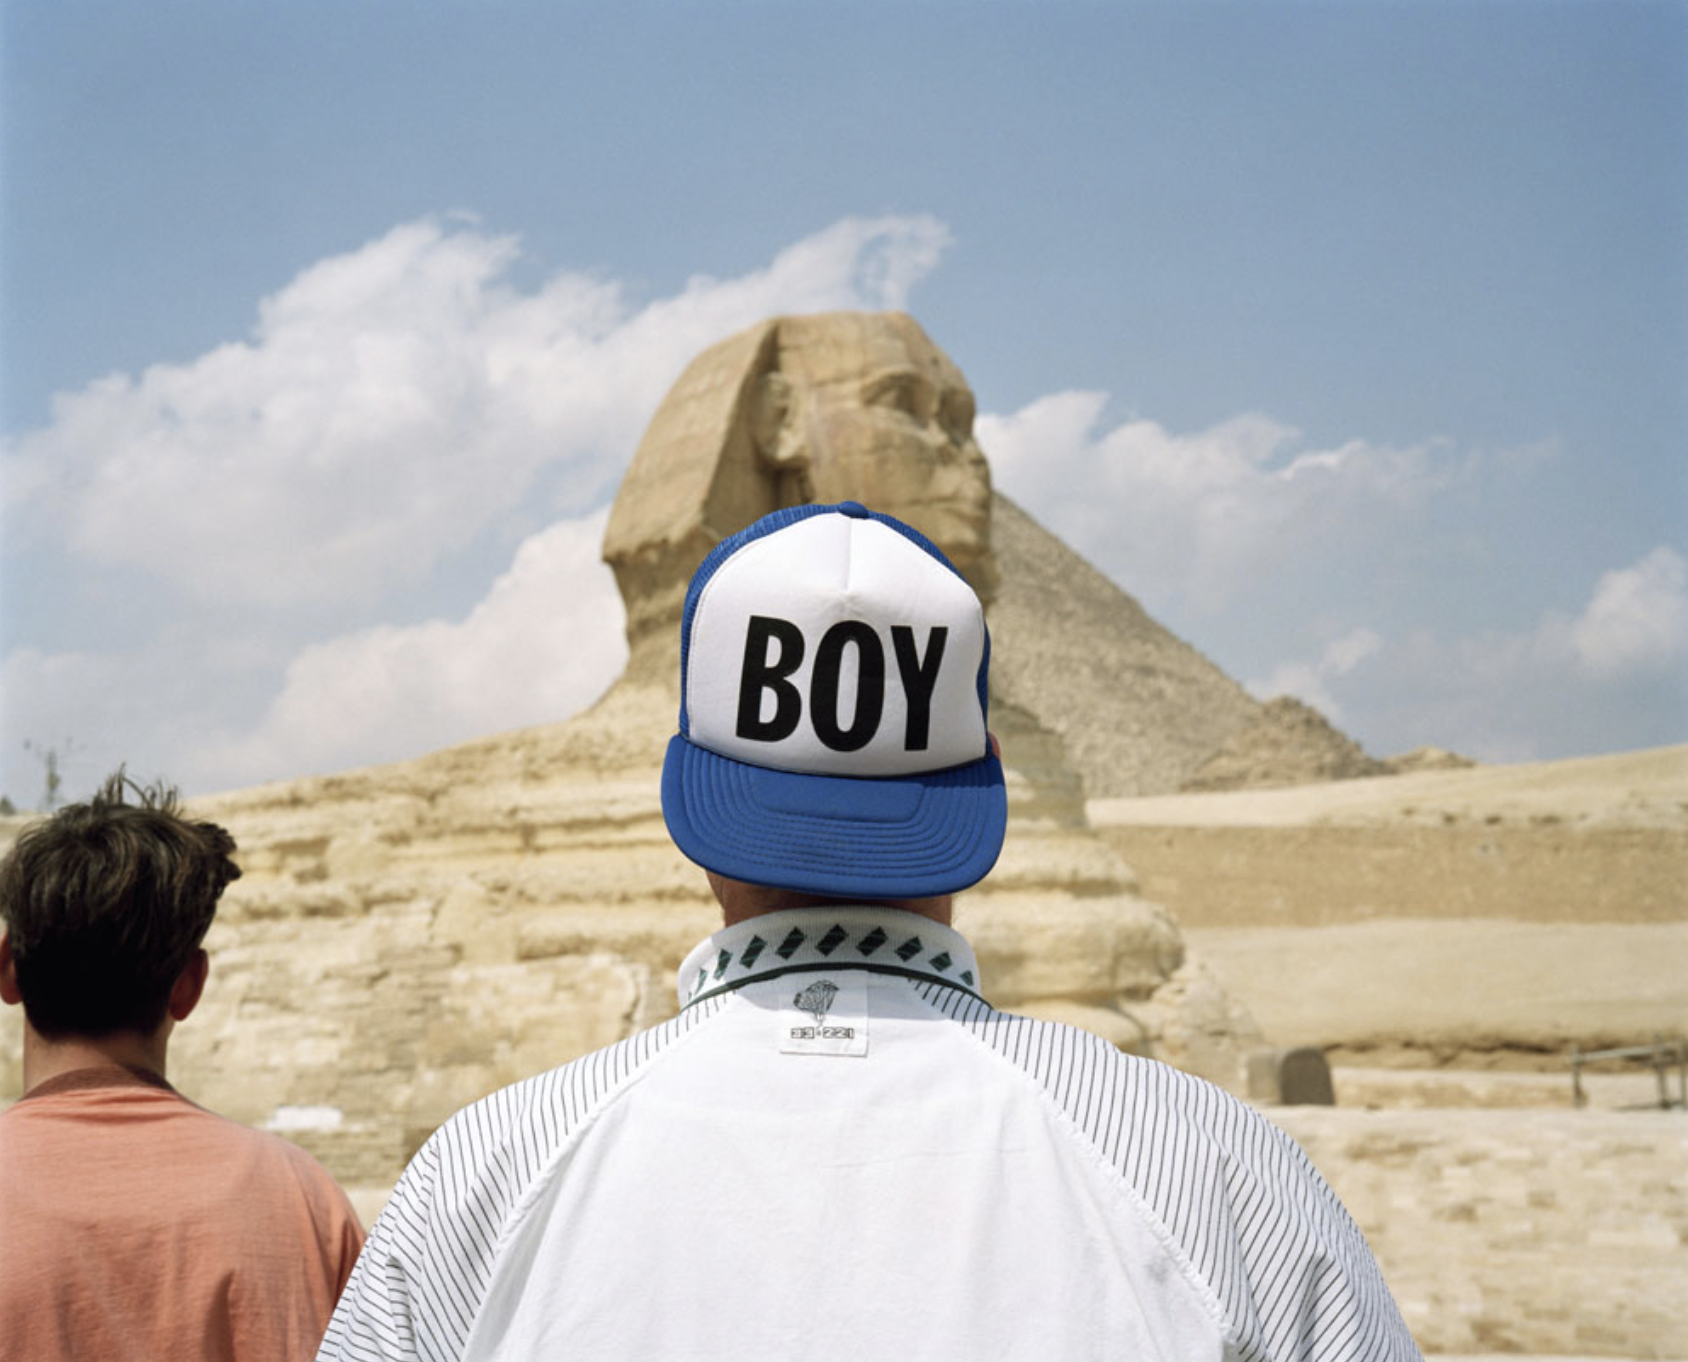 The Great Sphinx, Giza, Egypt (Small World), 1992